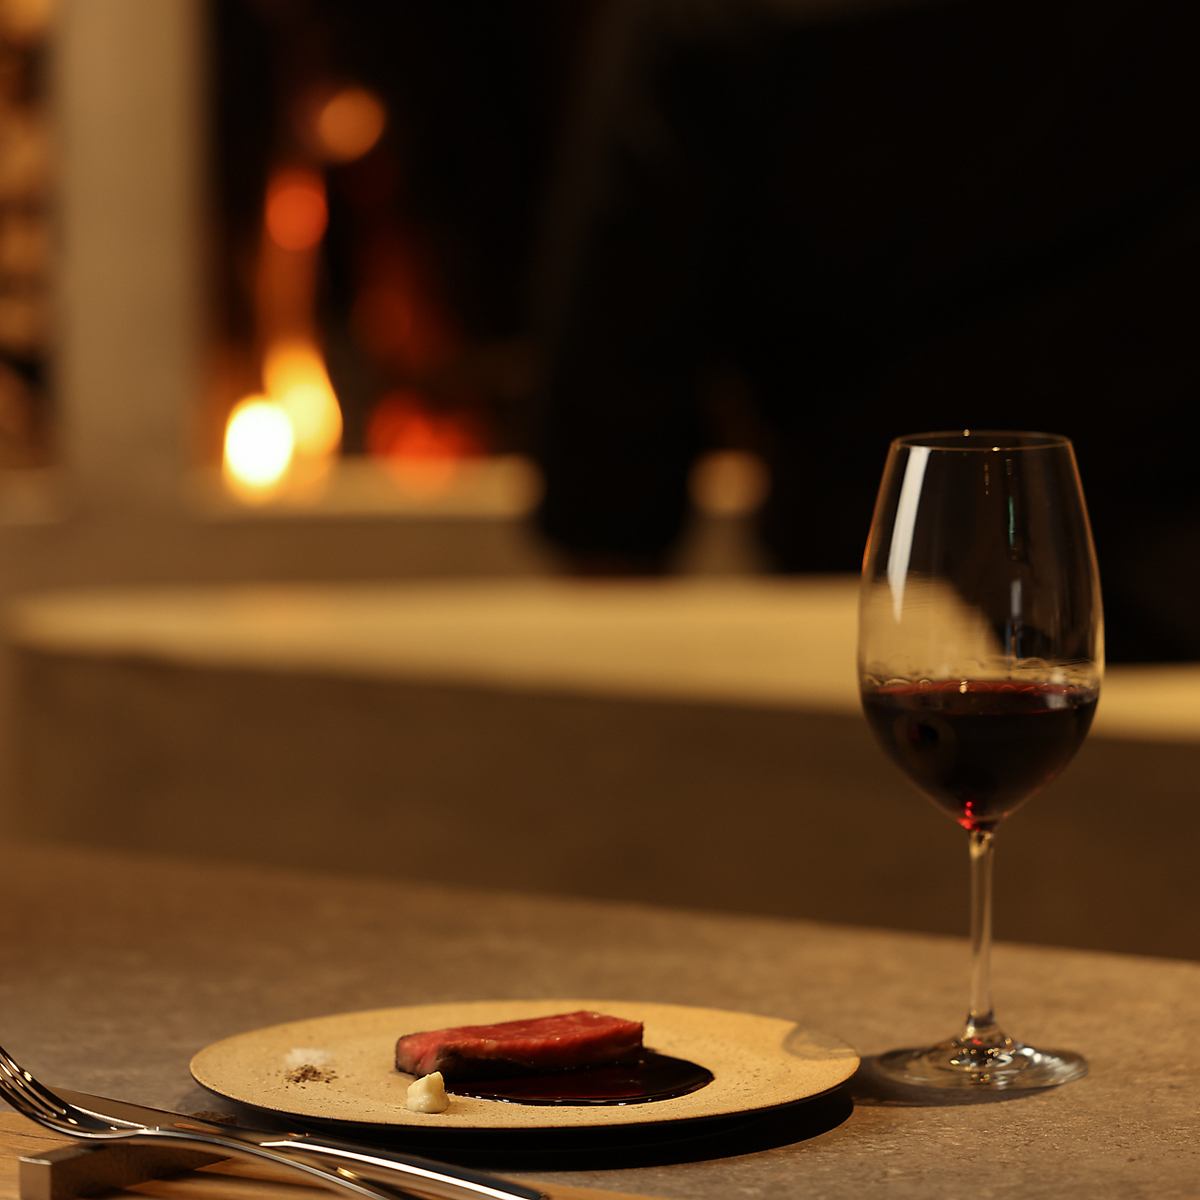 You can enjoy innovative authentic French cuisine using firewood.Wine pairing is also popular♪